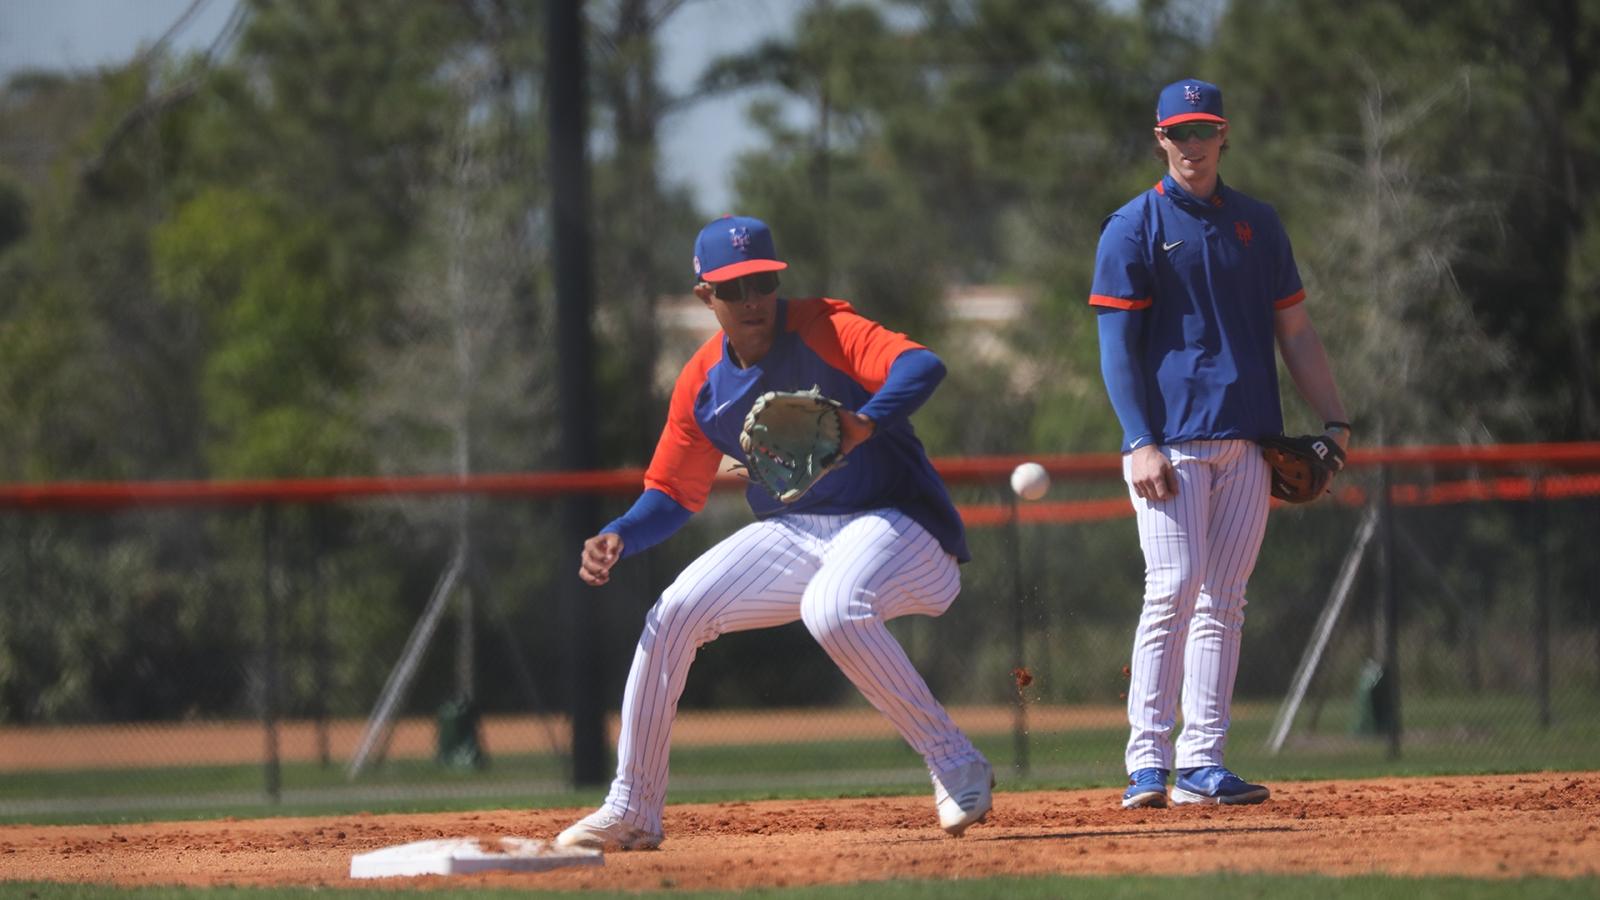 Mets prospect Mark Vientos fielding at 2021 spring training in Port St. Lucie, Fla. / Rob Carbuccia/SNY